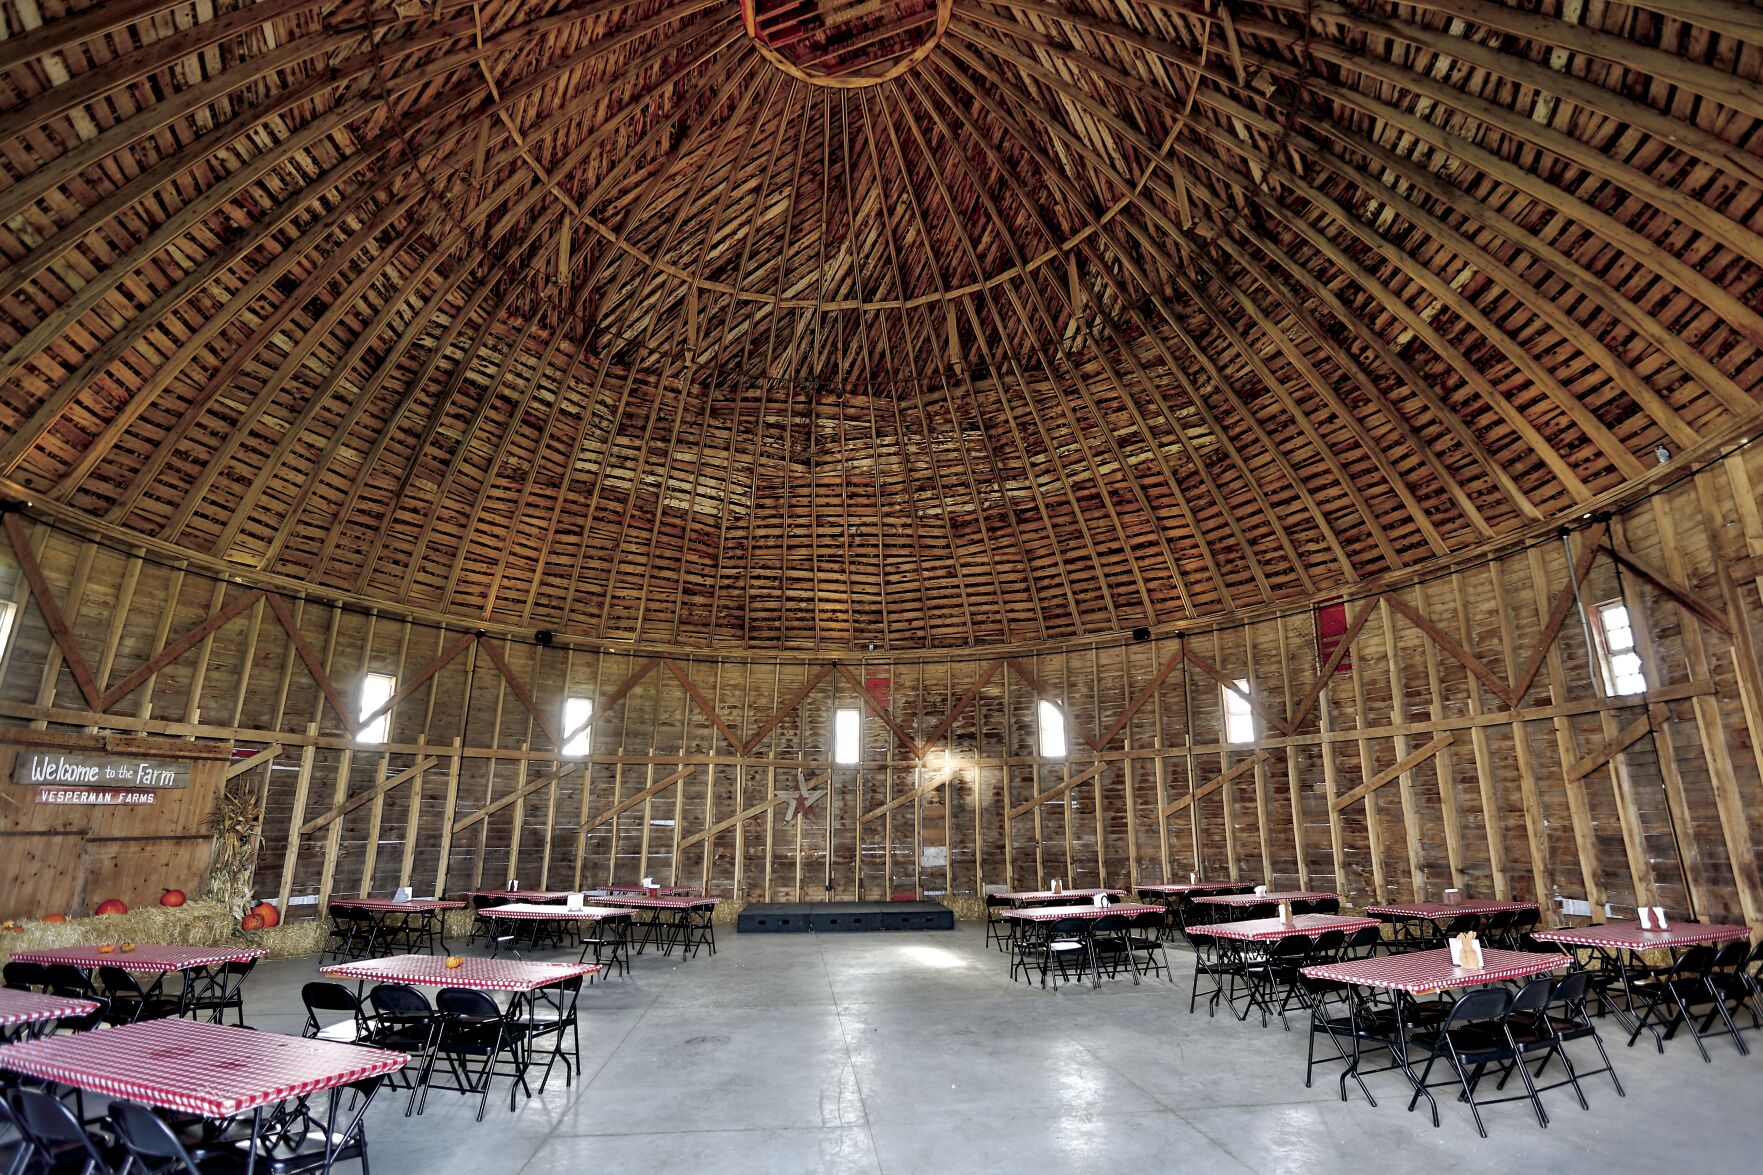 The inside look at the unique round barn built in 1913 that was moved to Vesperman Farms located south of Lancaster, Wis.    PHOTO CREDIT: Dave Kettering